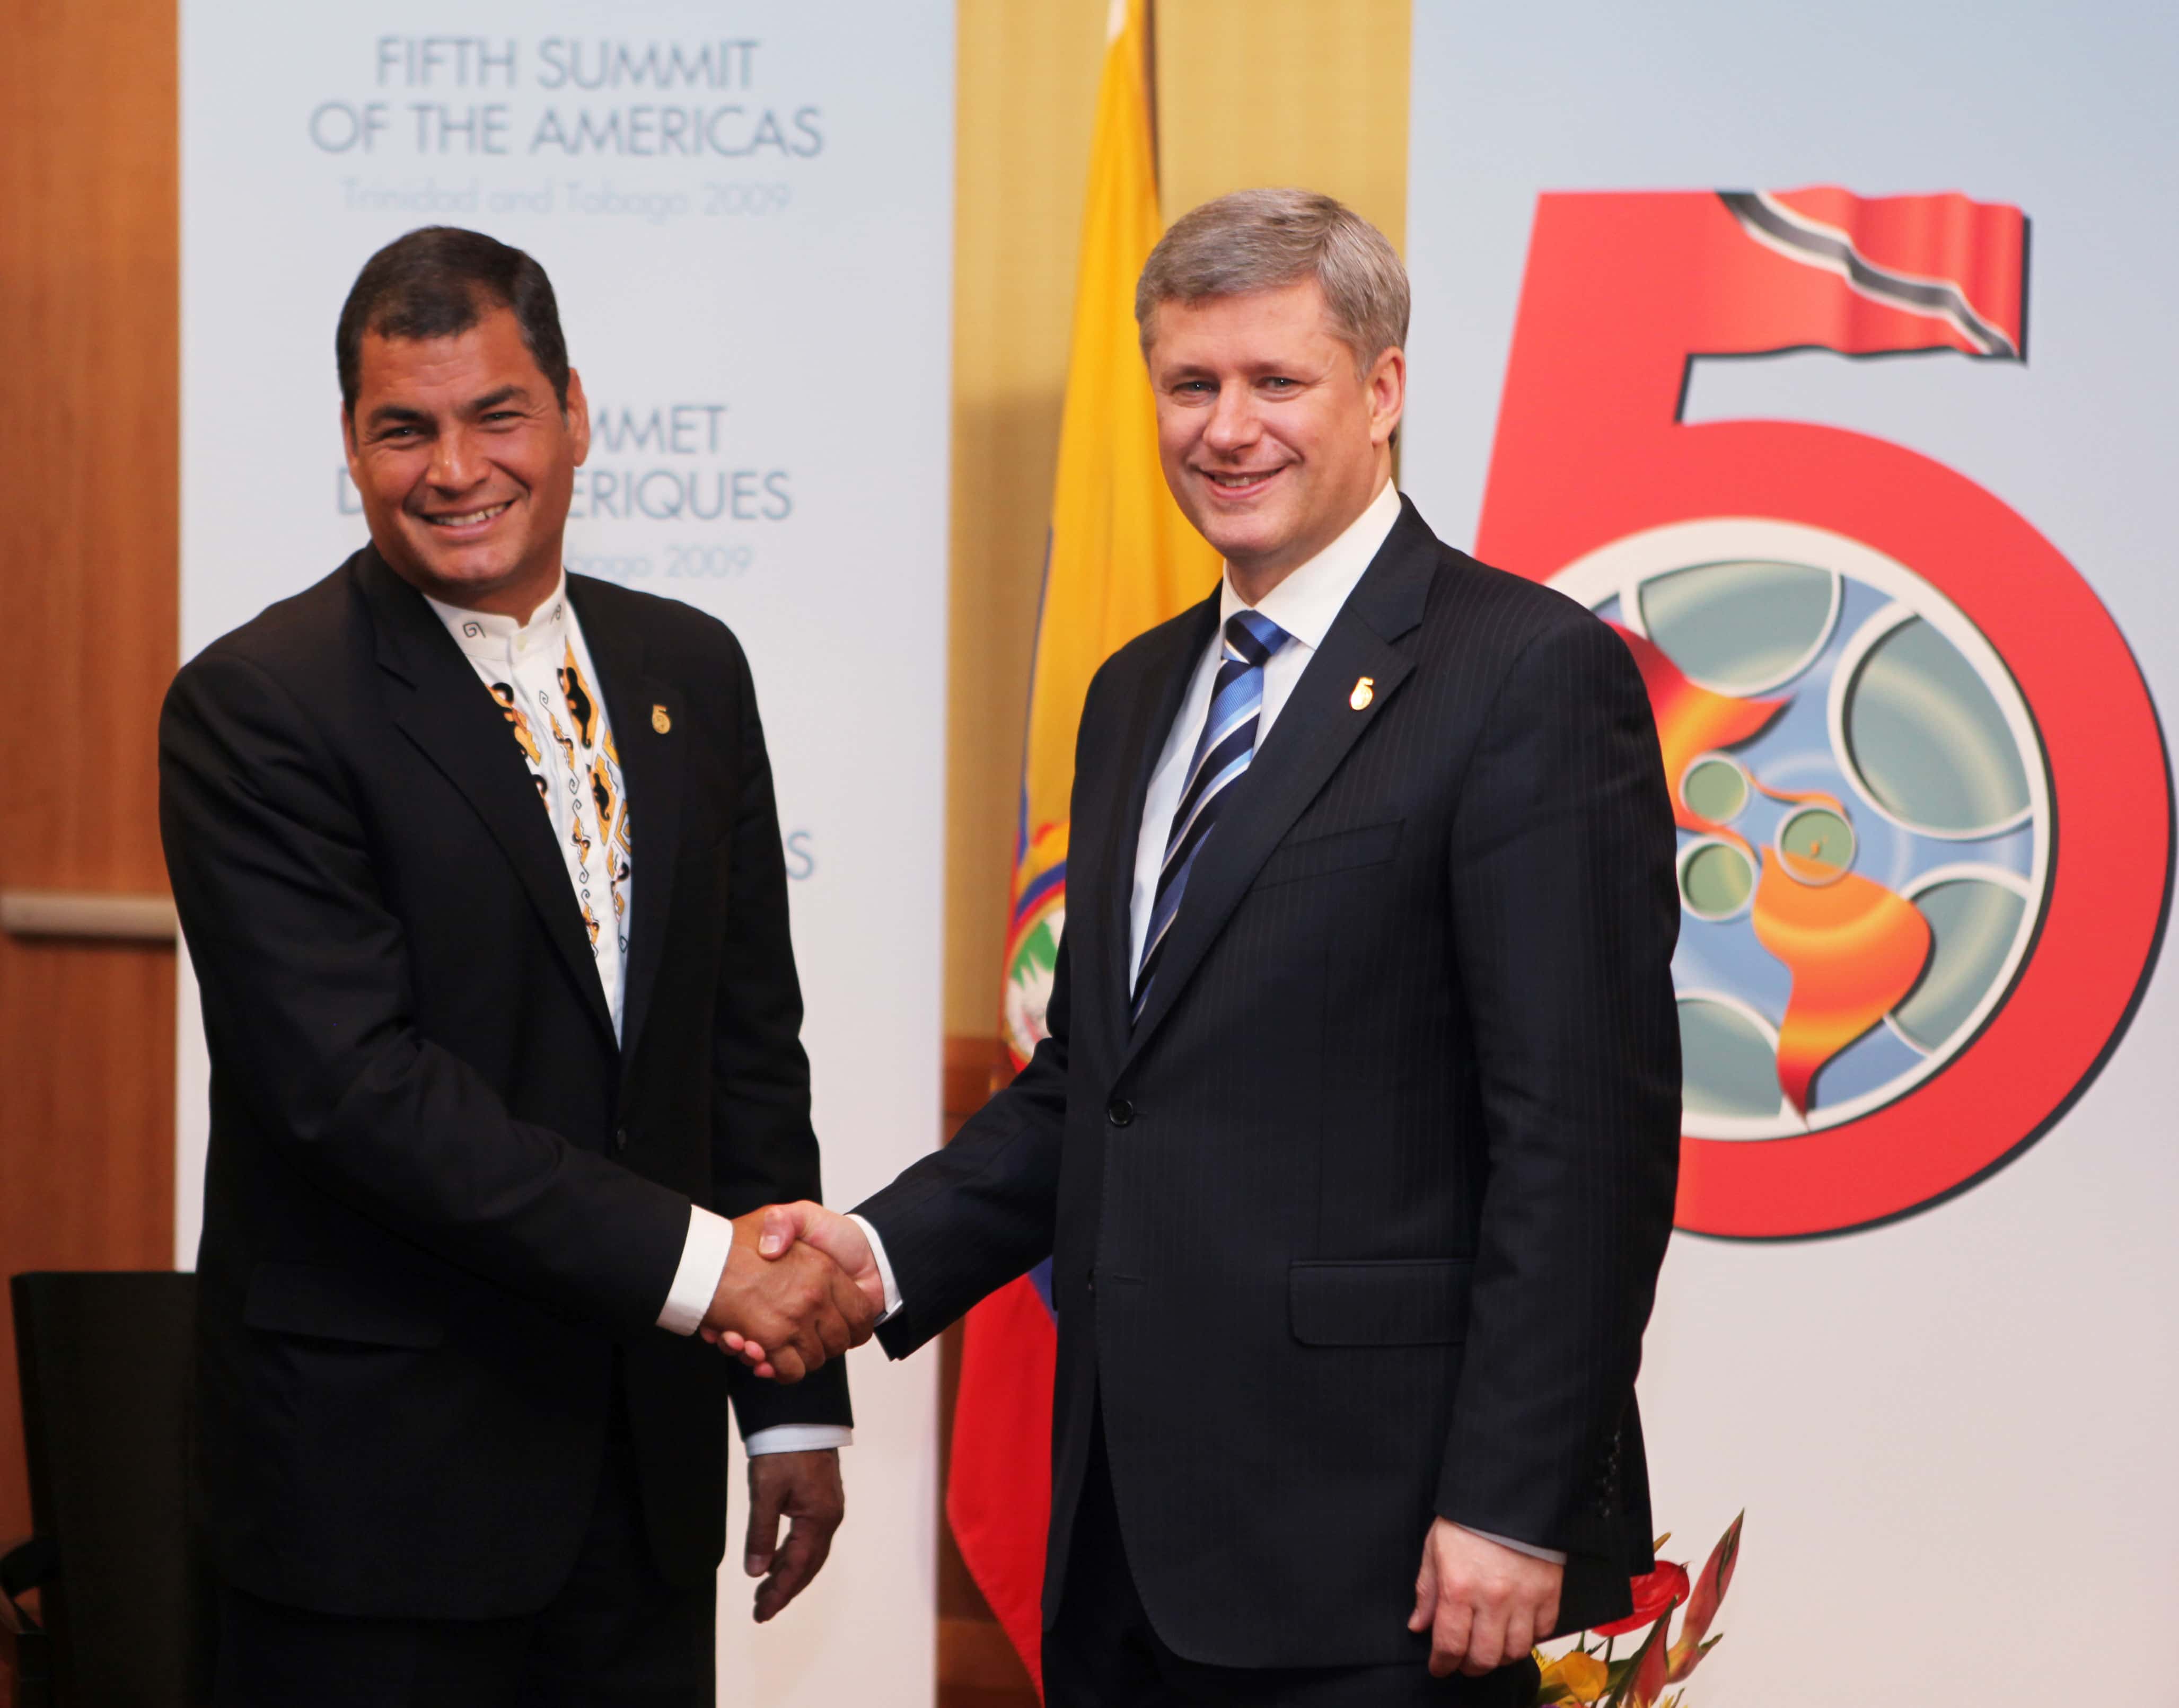 President Rafael Correa, left, shakes hands with Prime Minister Stephen Harper during the Summit of the Americas in Port of Spain, Trinidad and Tobago, 18 April 2009, AP Photo/Brennan Linsley